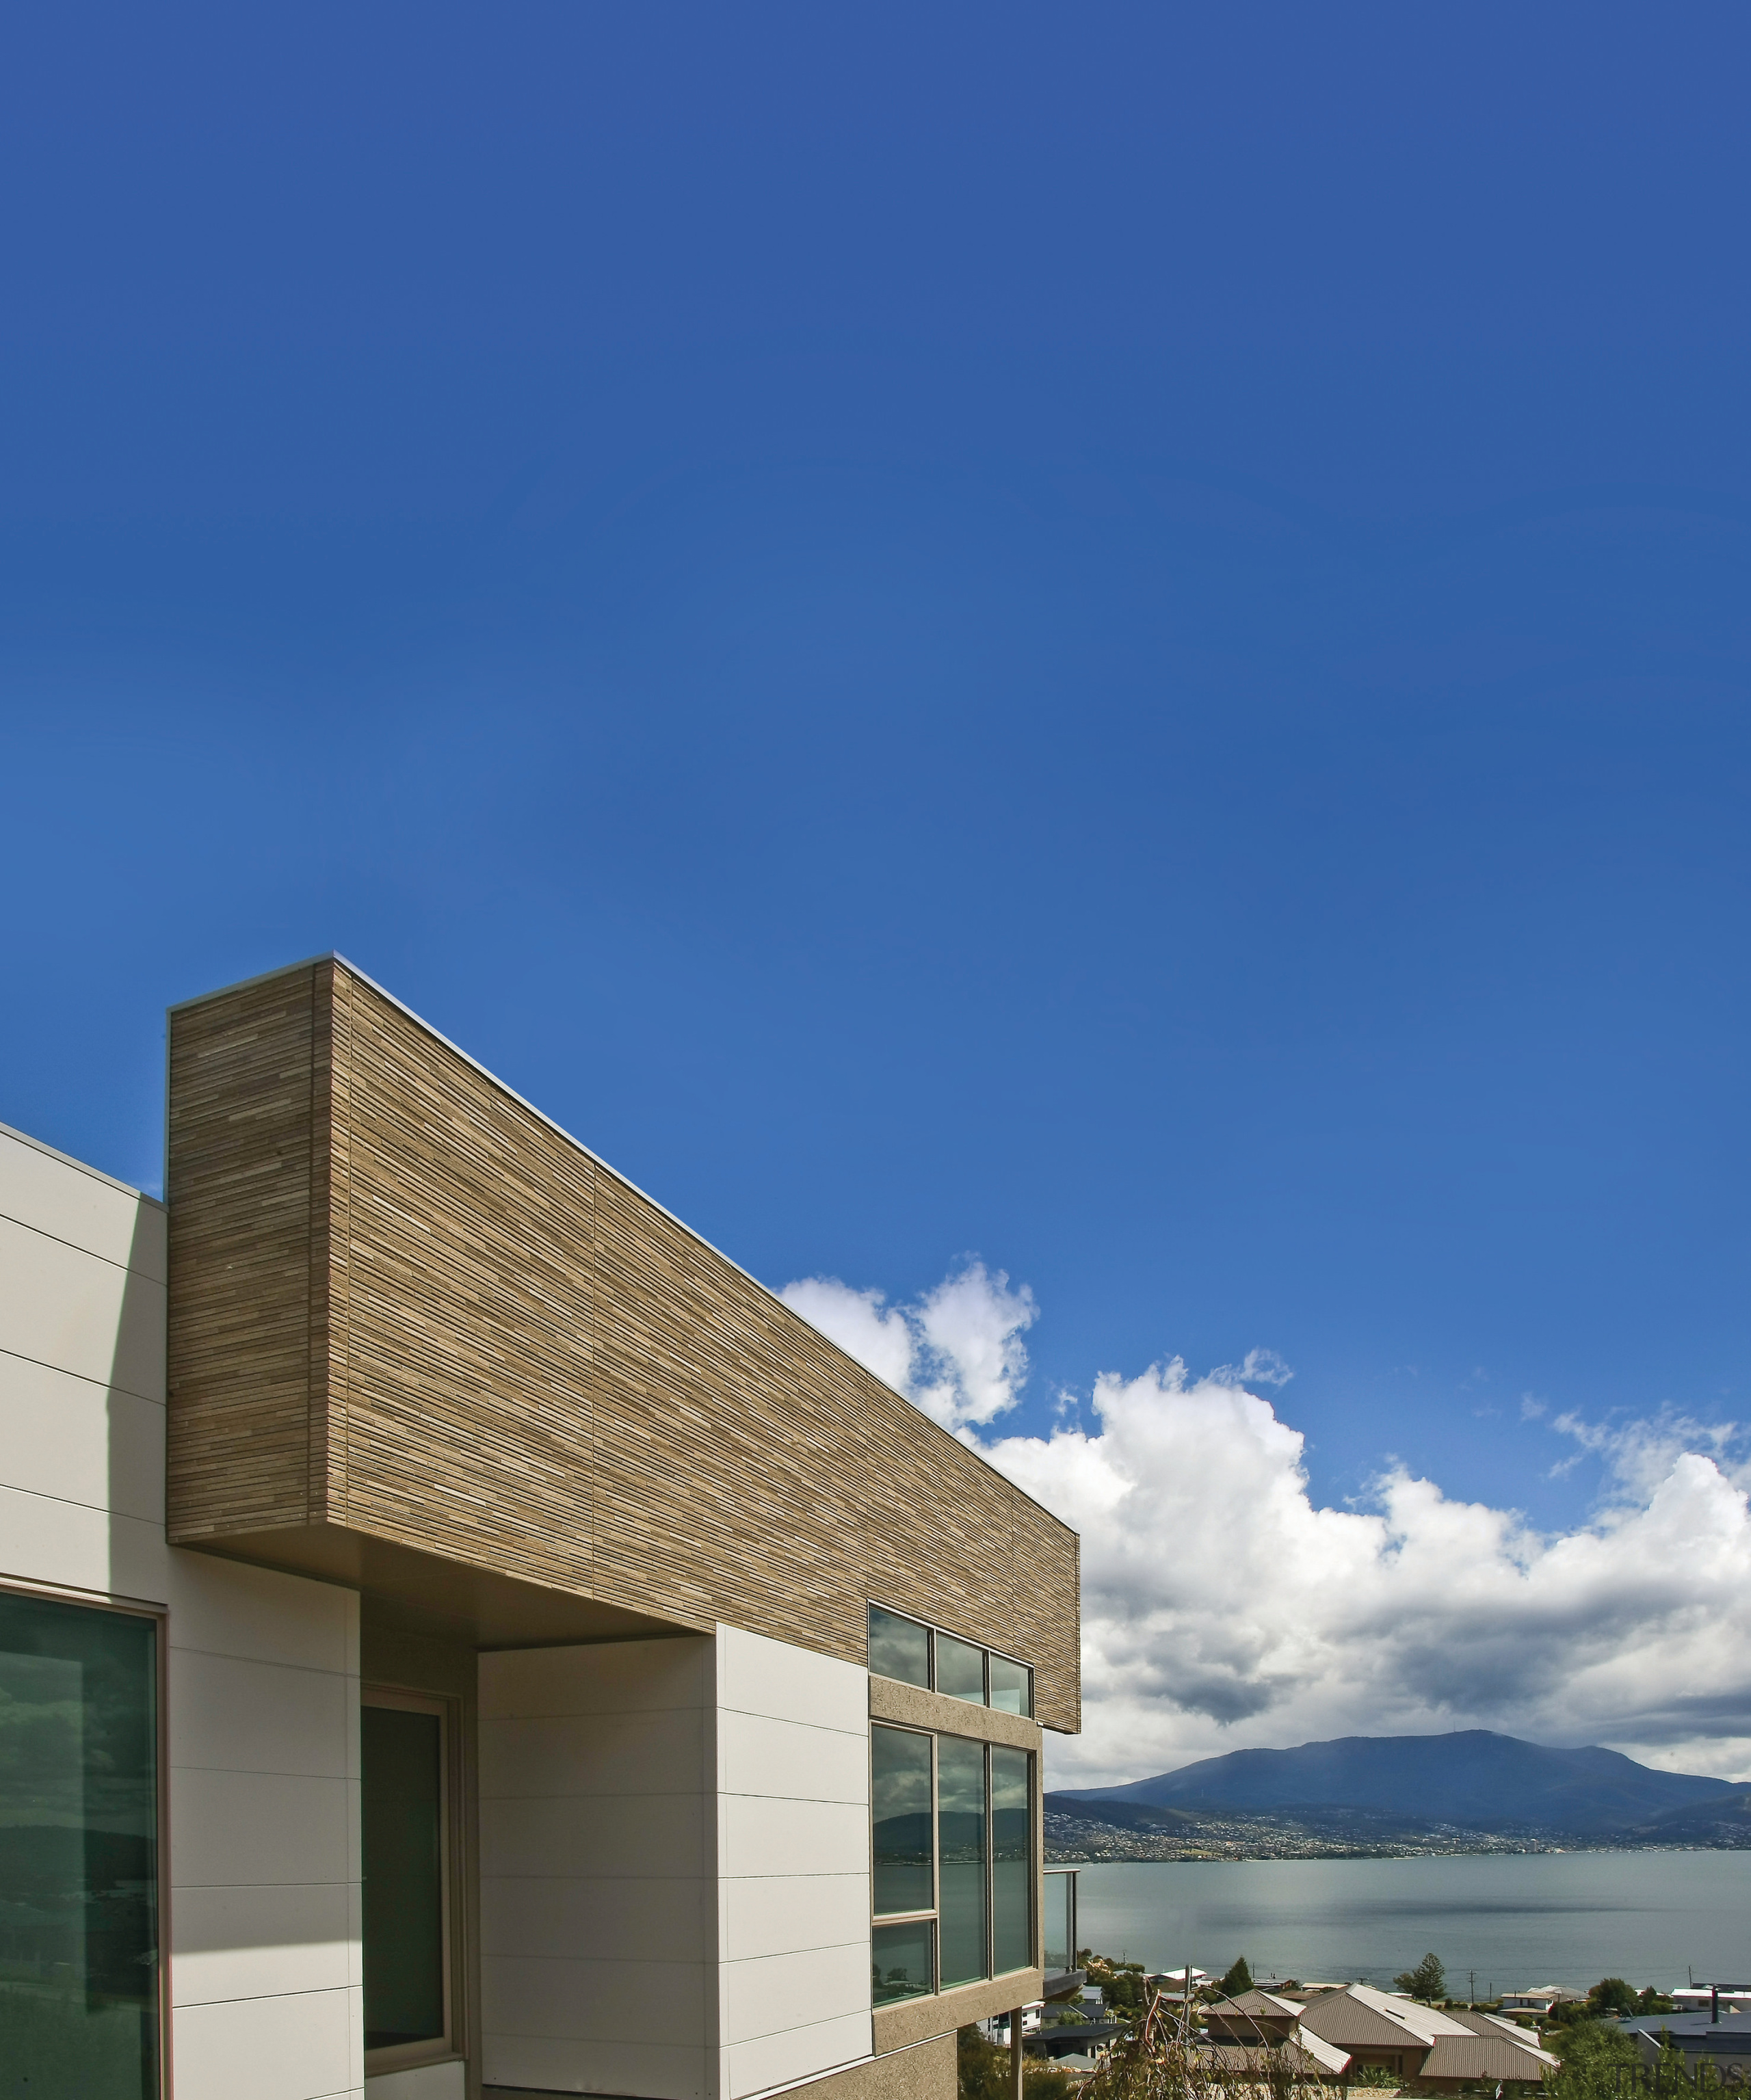 Designer Series Sandstone textured panels provide an attractive architecture, building, cloud, corporate headquarters, daytime, elevation, facade, home, house, real estate, sky, blue